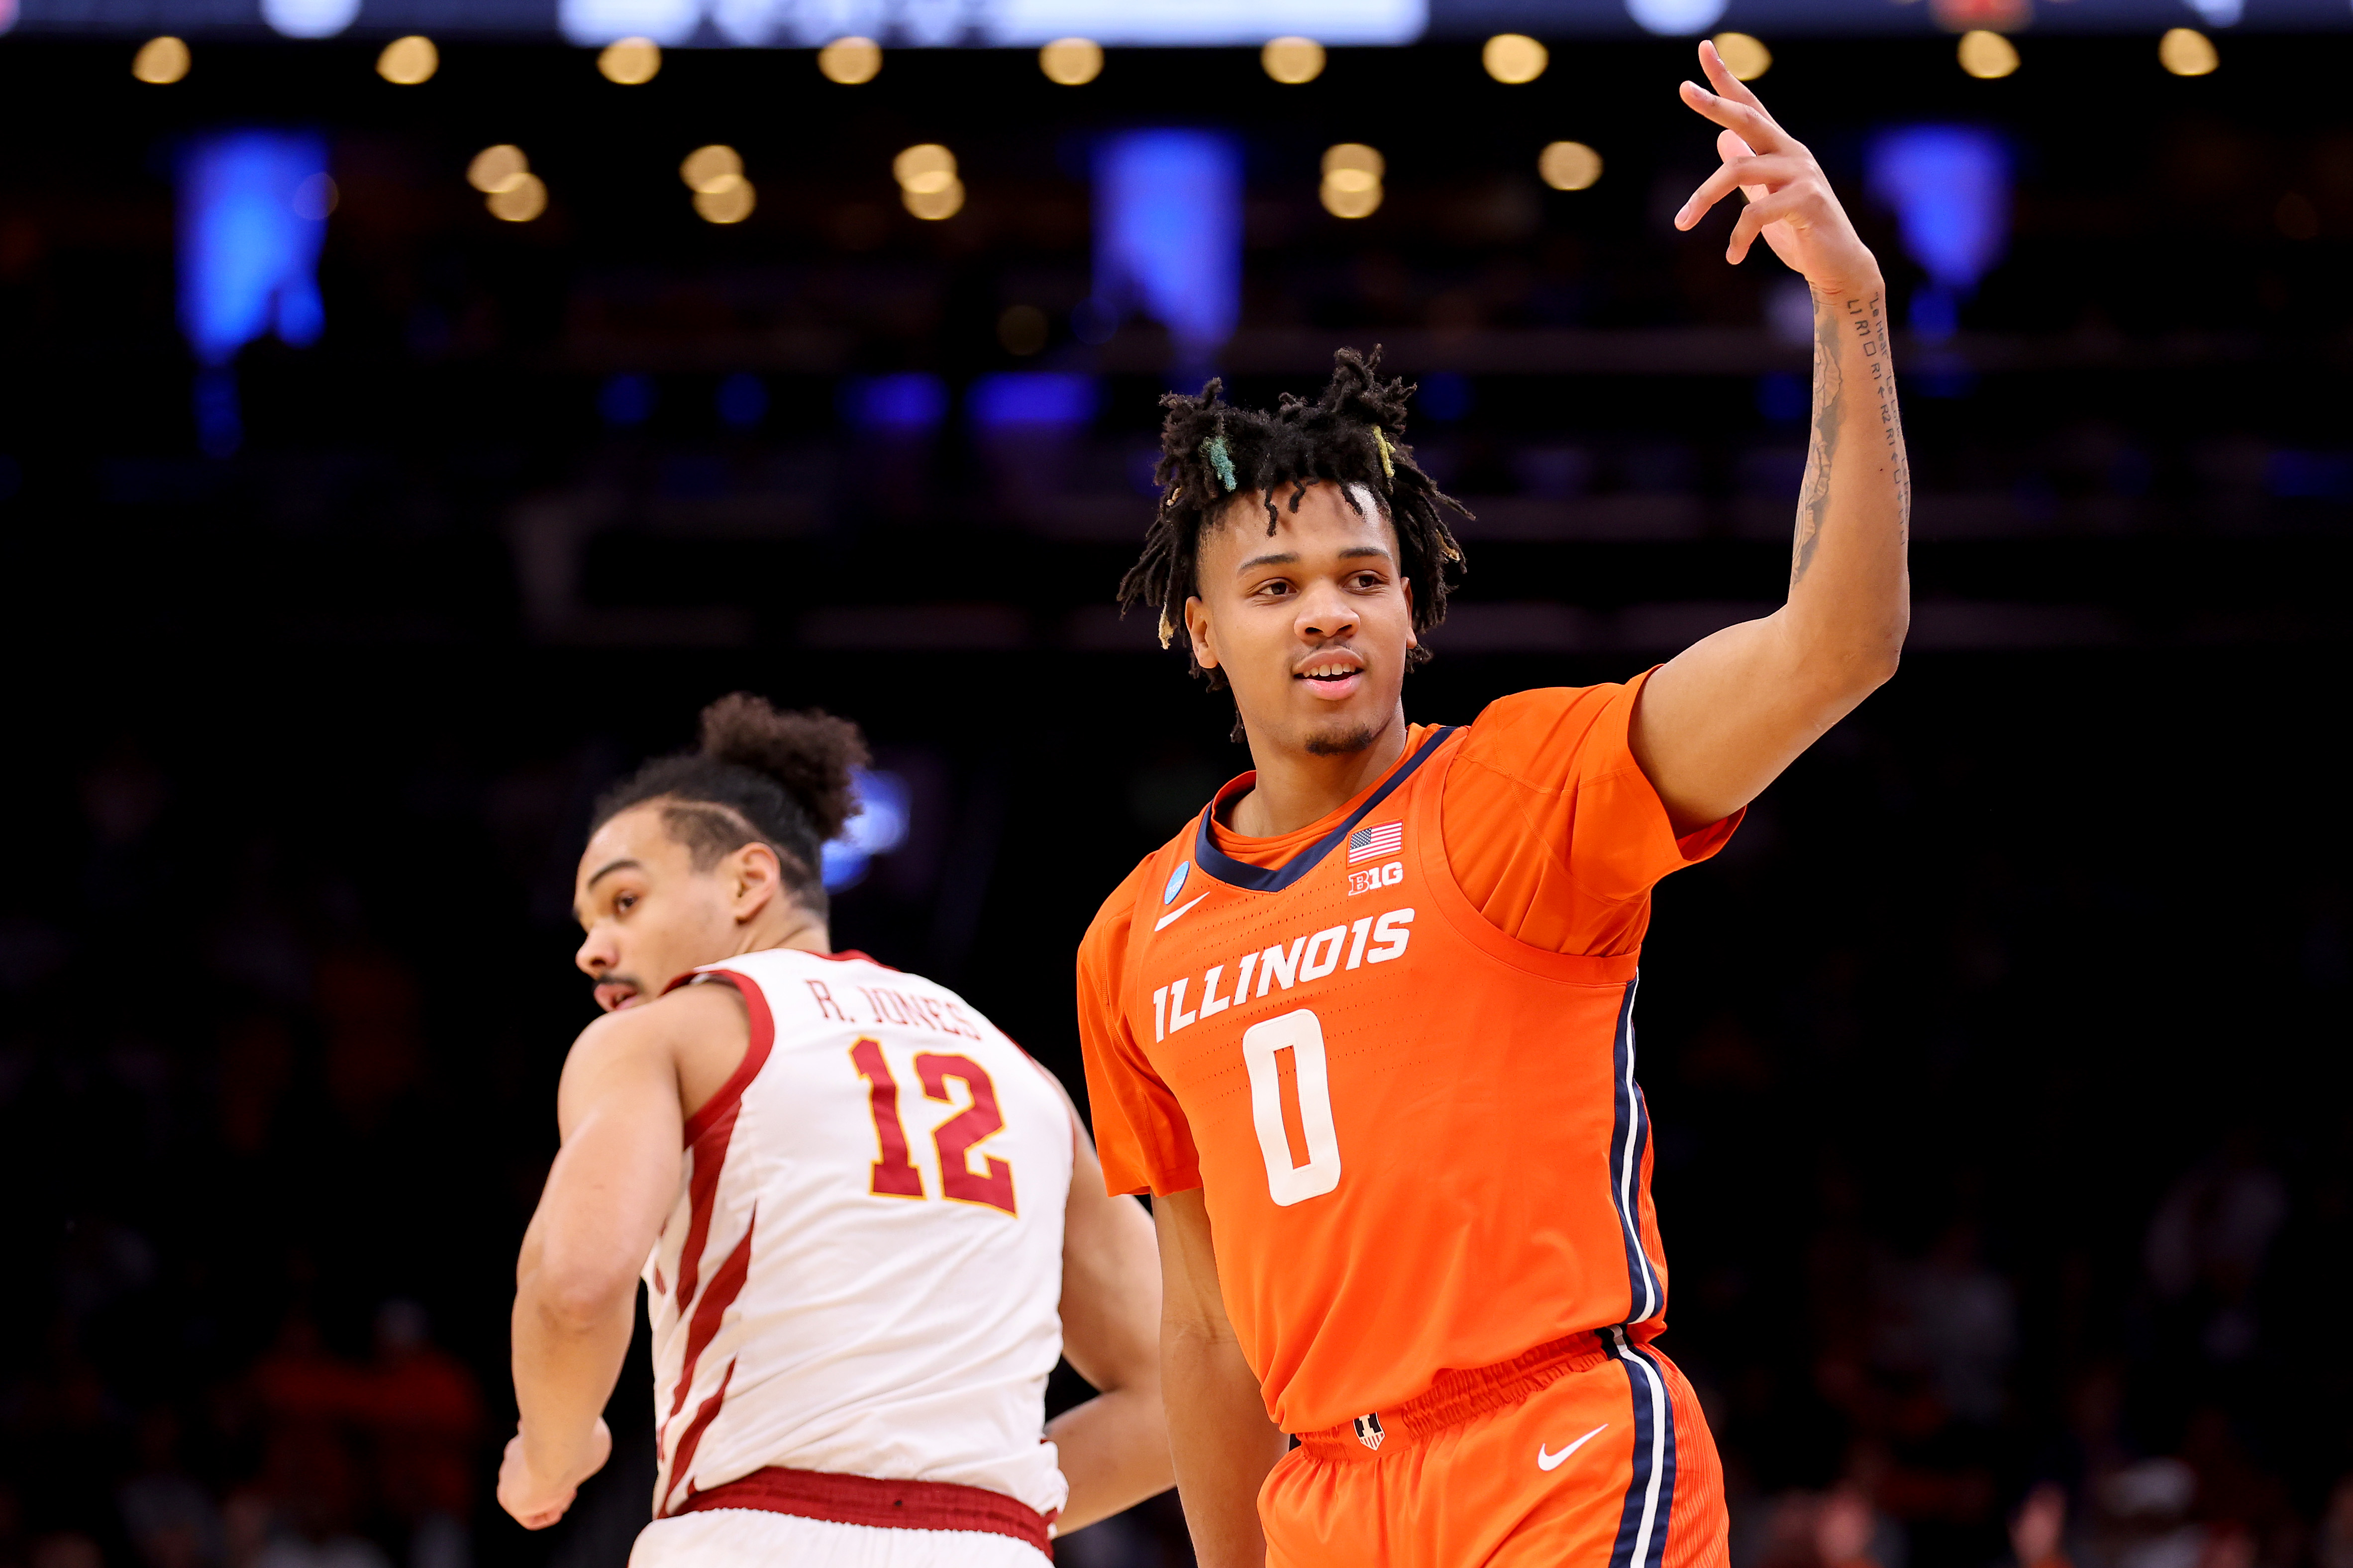 BOSTON, MASSACHUSETTS - MARCH 28: Terrence Shannon Jr. #0 of the Illinois Fighting Illini celebrates a basket against the Iowa State Cyclones during the first half in the Sweet 16 round of the NCAA Men's Basketball Tournament at TD Garden on March 28, 2024 in Boston, Massachusetts. (Photo by Michael Reaves/Getty Images)